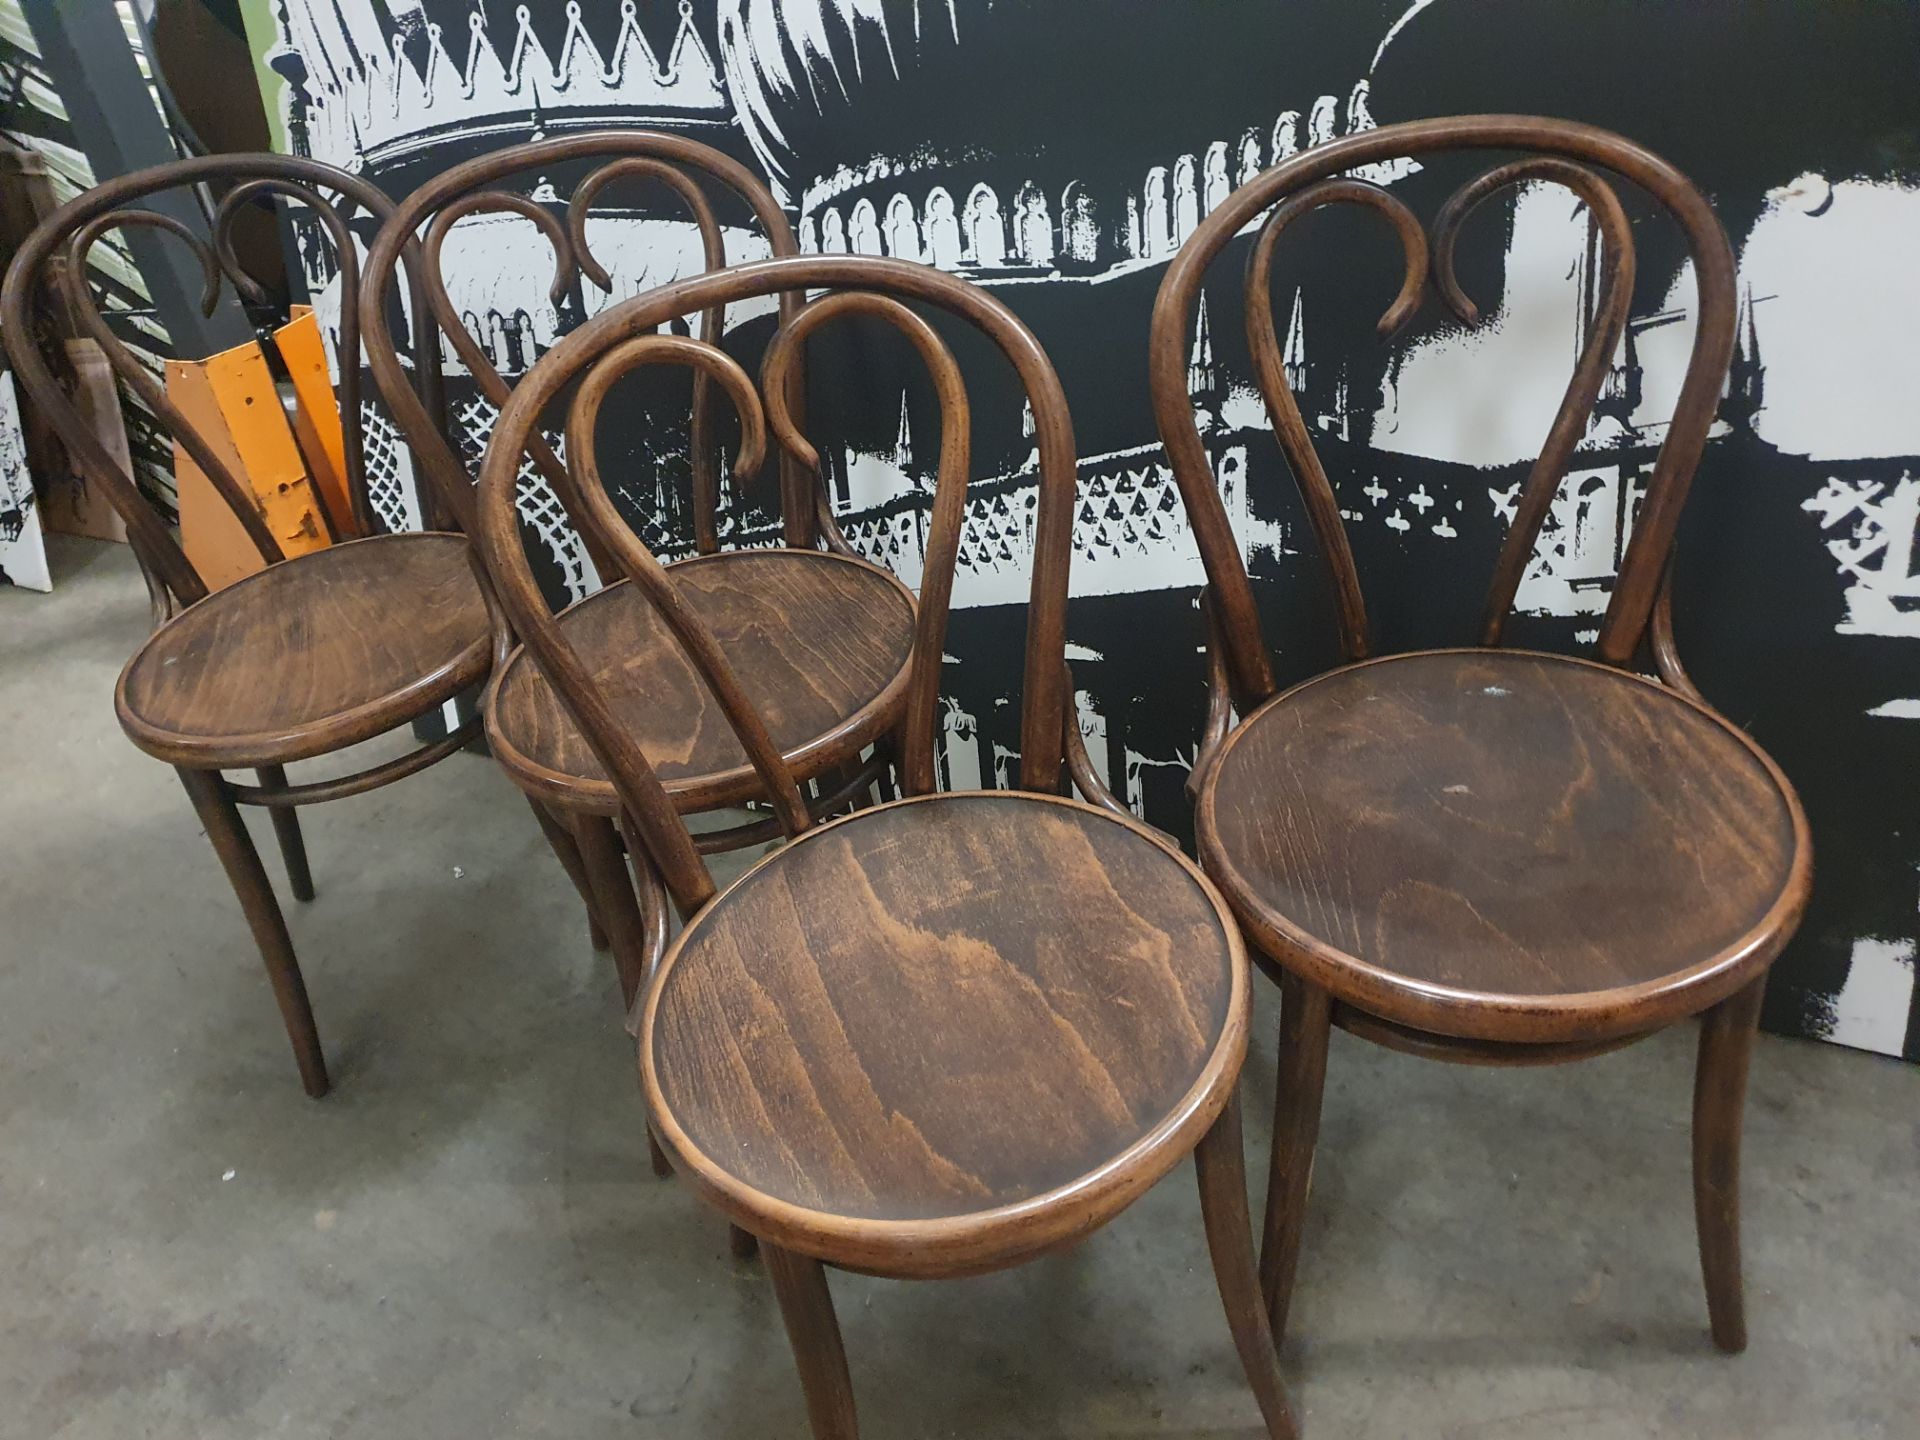 * 4 x bentwood chairs